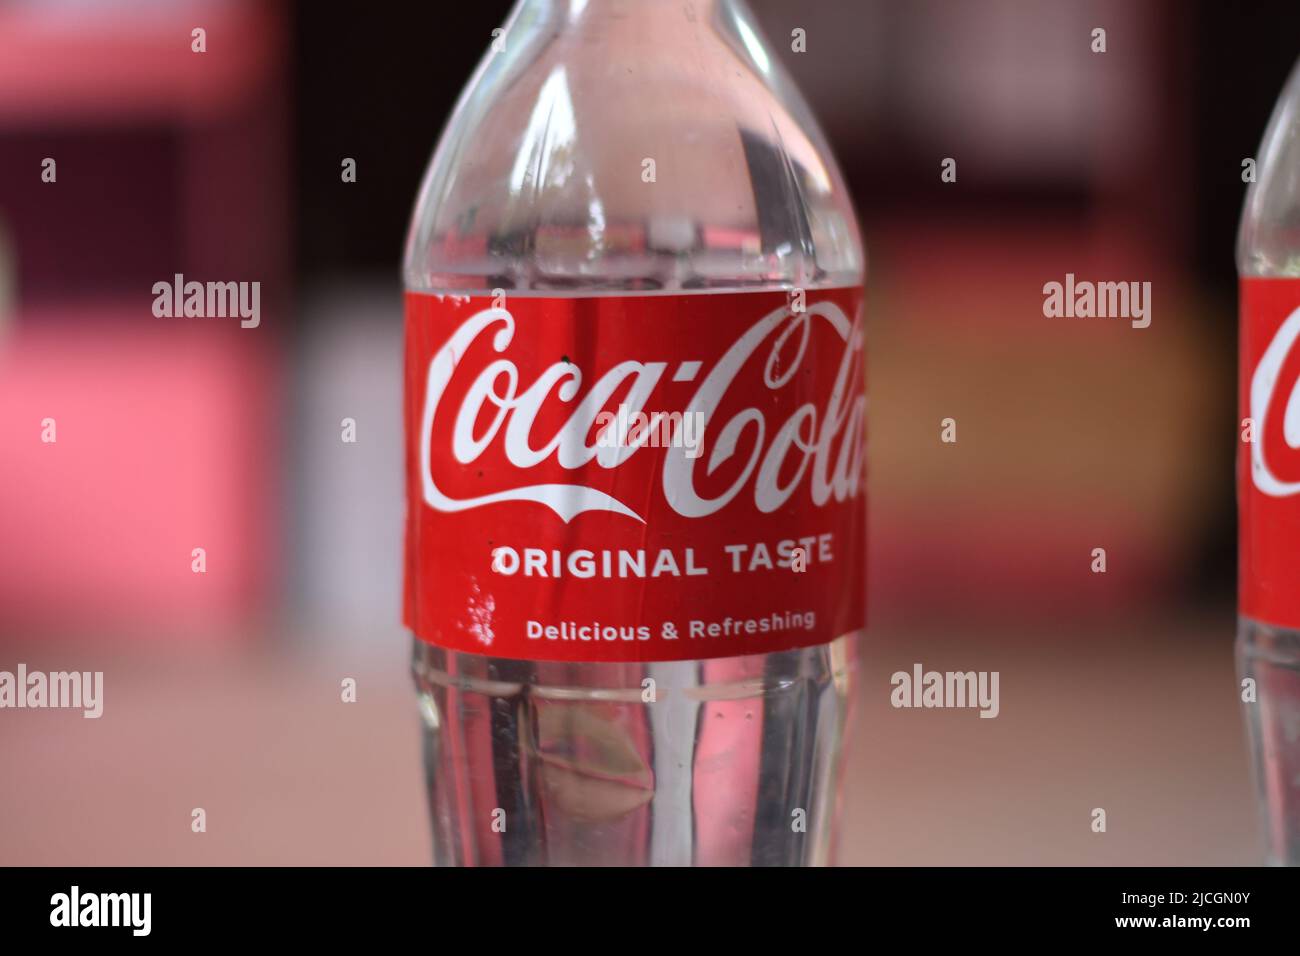 https://c8.alamy.com/comp/2JCGN0Y/plastic-bottles-of-original-white-coca-cola-soft-drink-most-popular-drink-in-the-world-2JCGN0Y.jpg